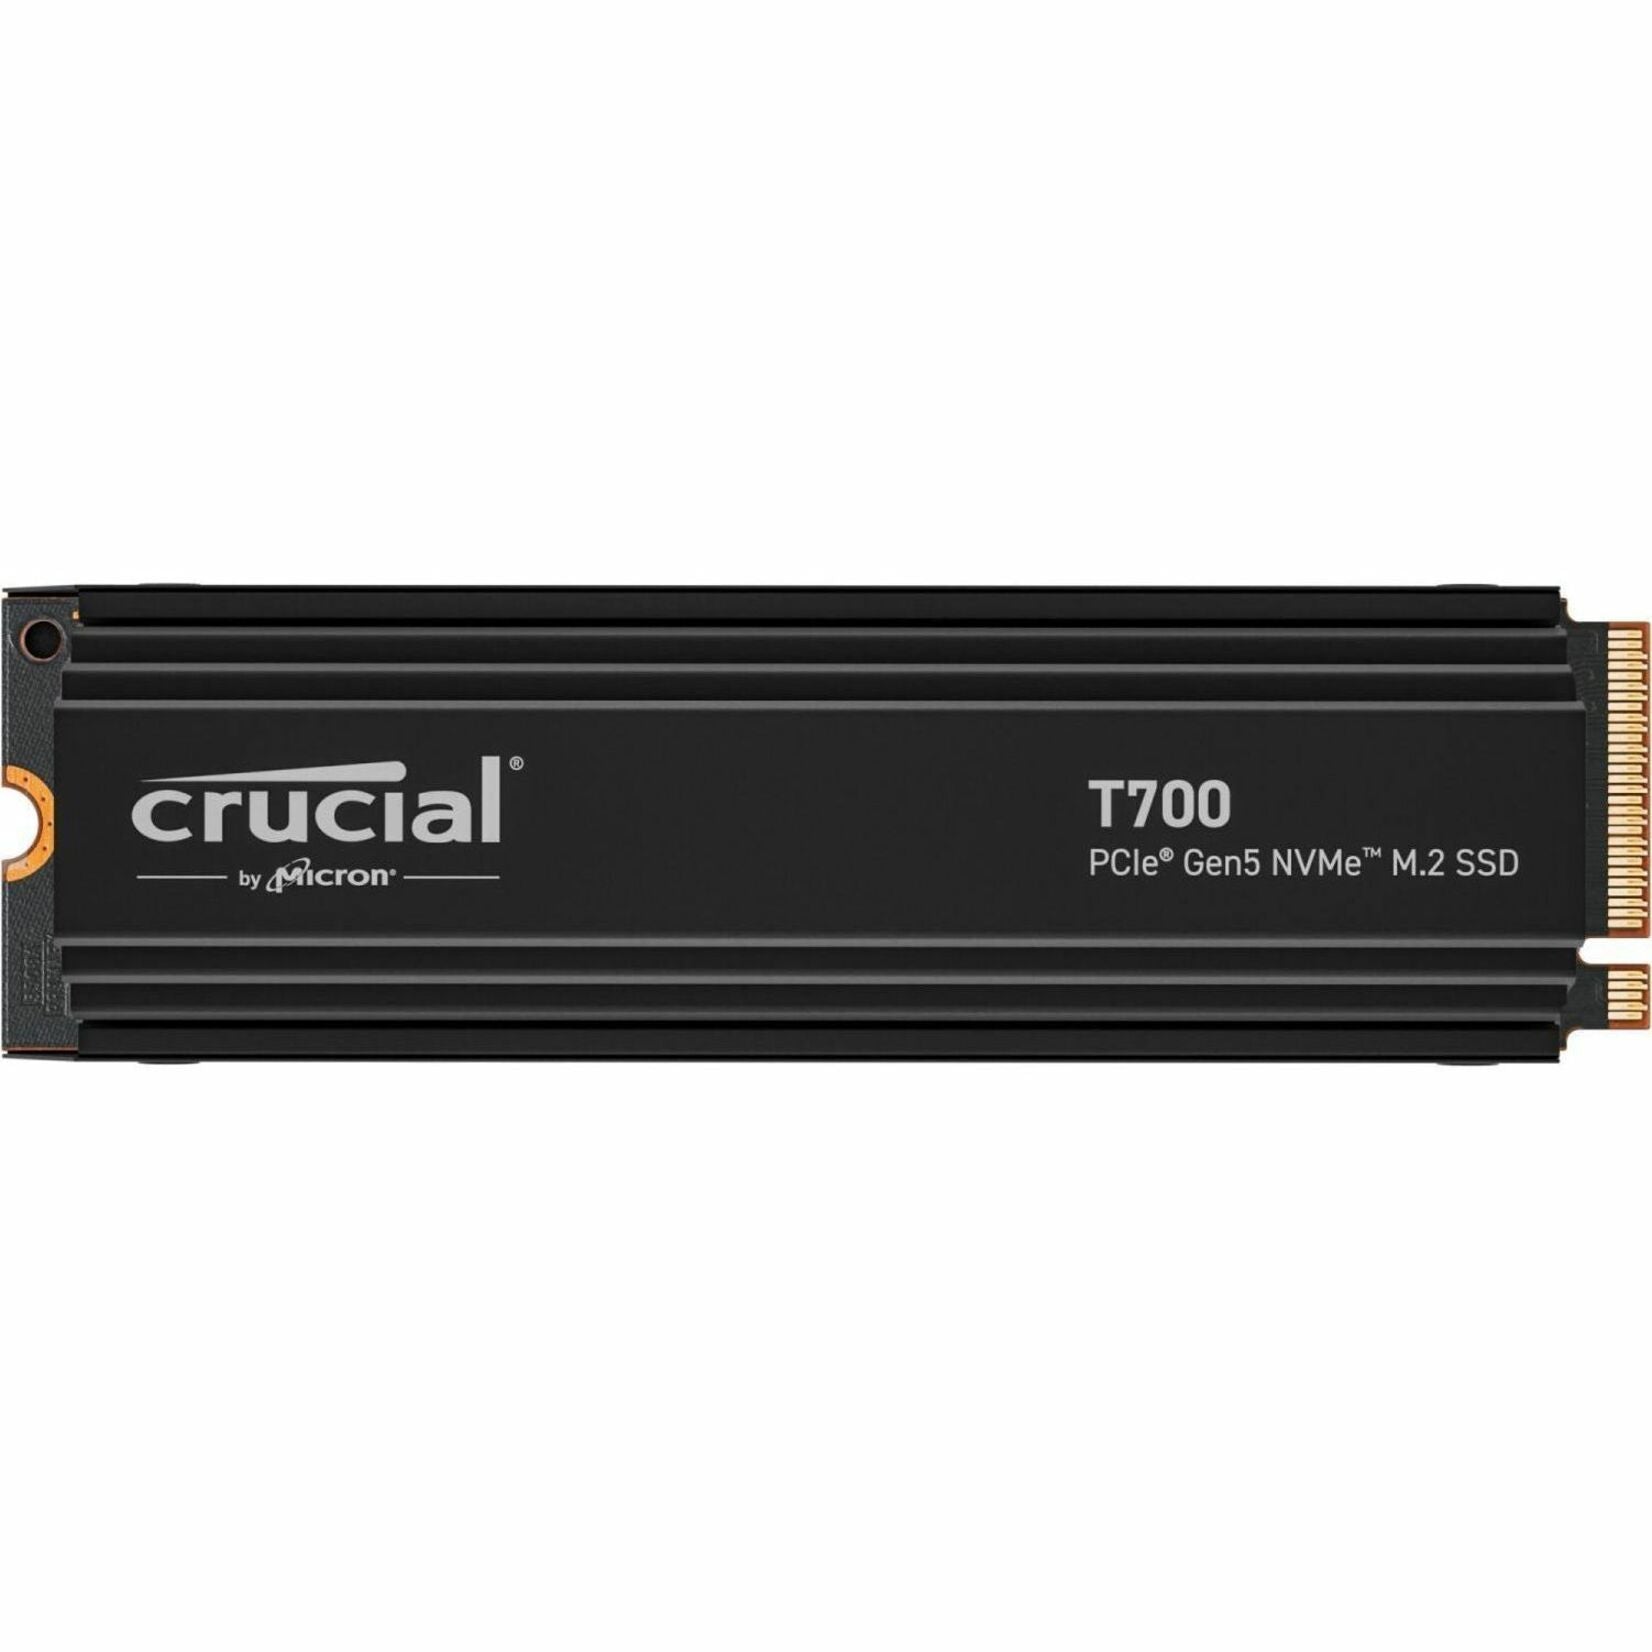 Crucial CT4000T700SSD5 T700 4TB PCIe Gen5 NVMe M.2 SSD with Heatsink, 5 Year Limited Warranty, RoHS, Taiwan RoHS, China RoHS, REACH, 4 TB Storage Capacity